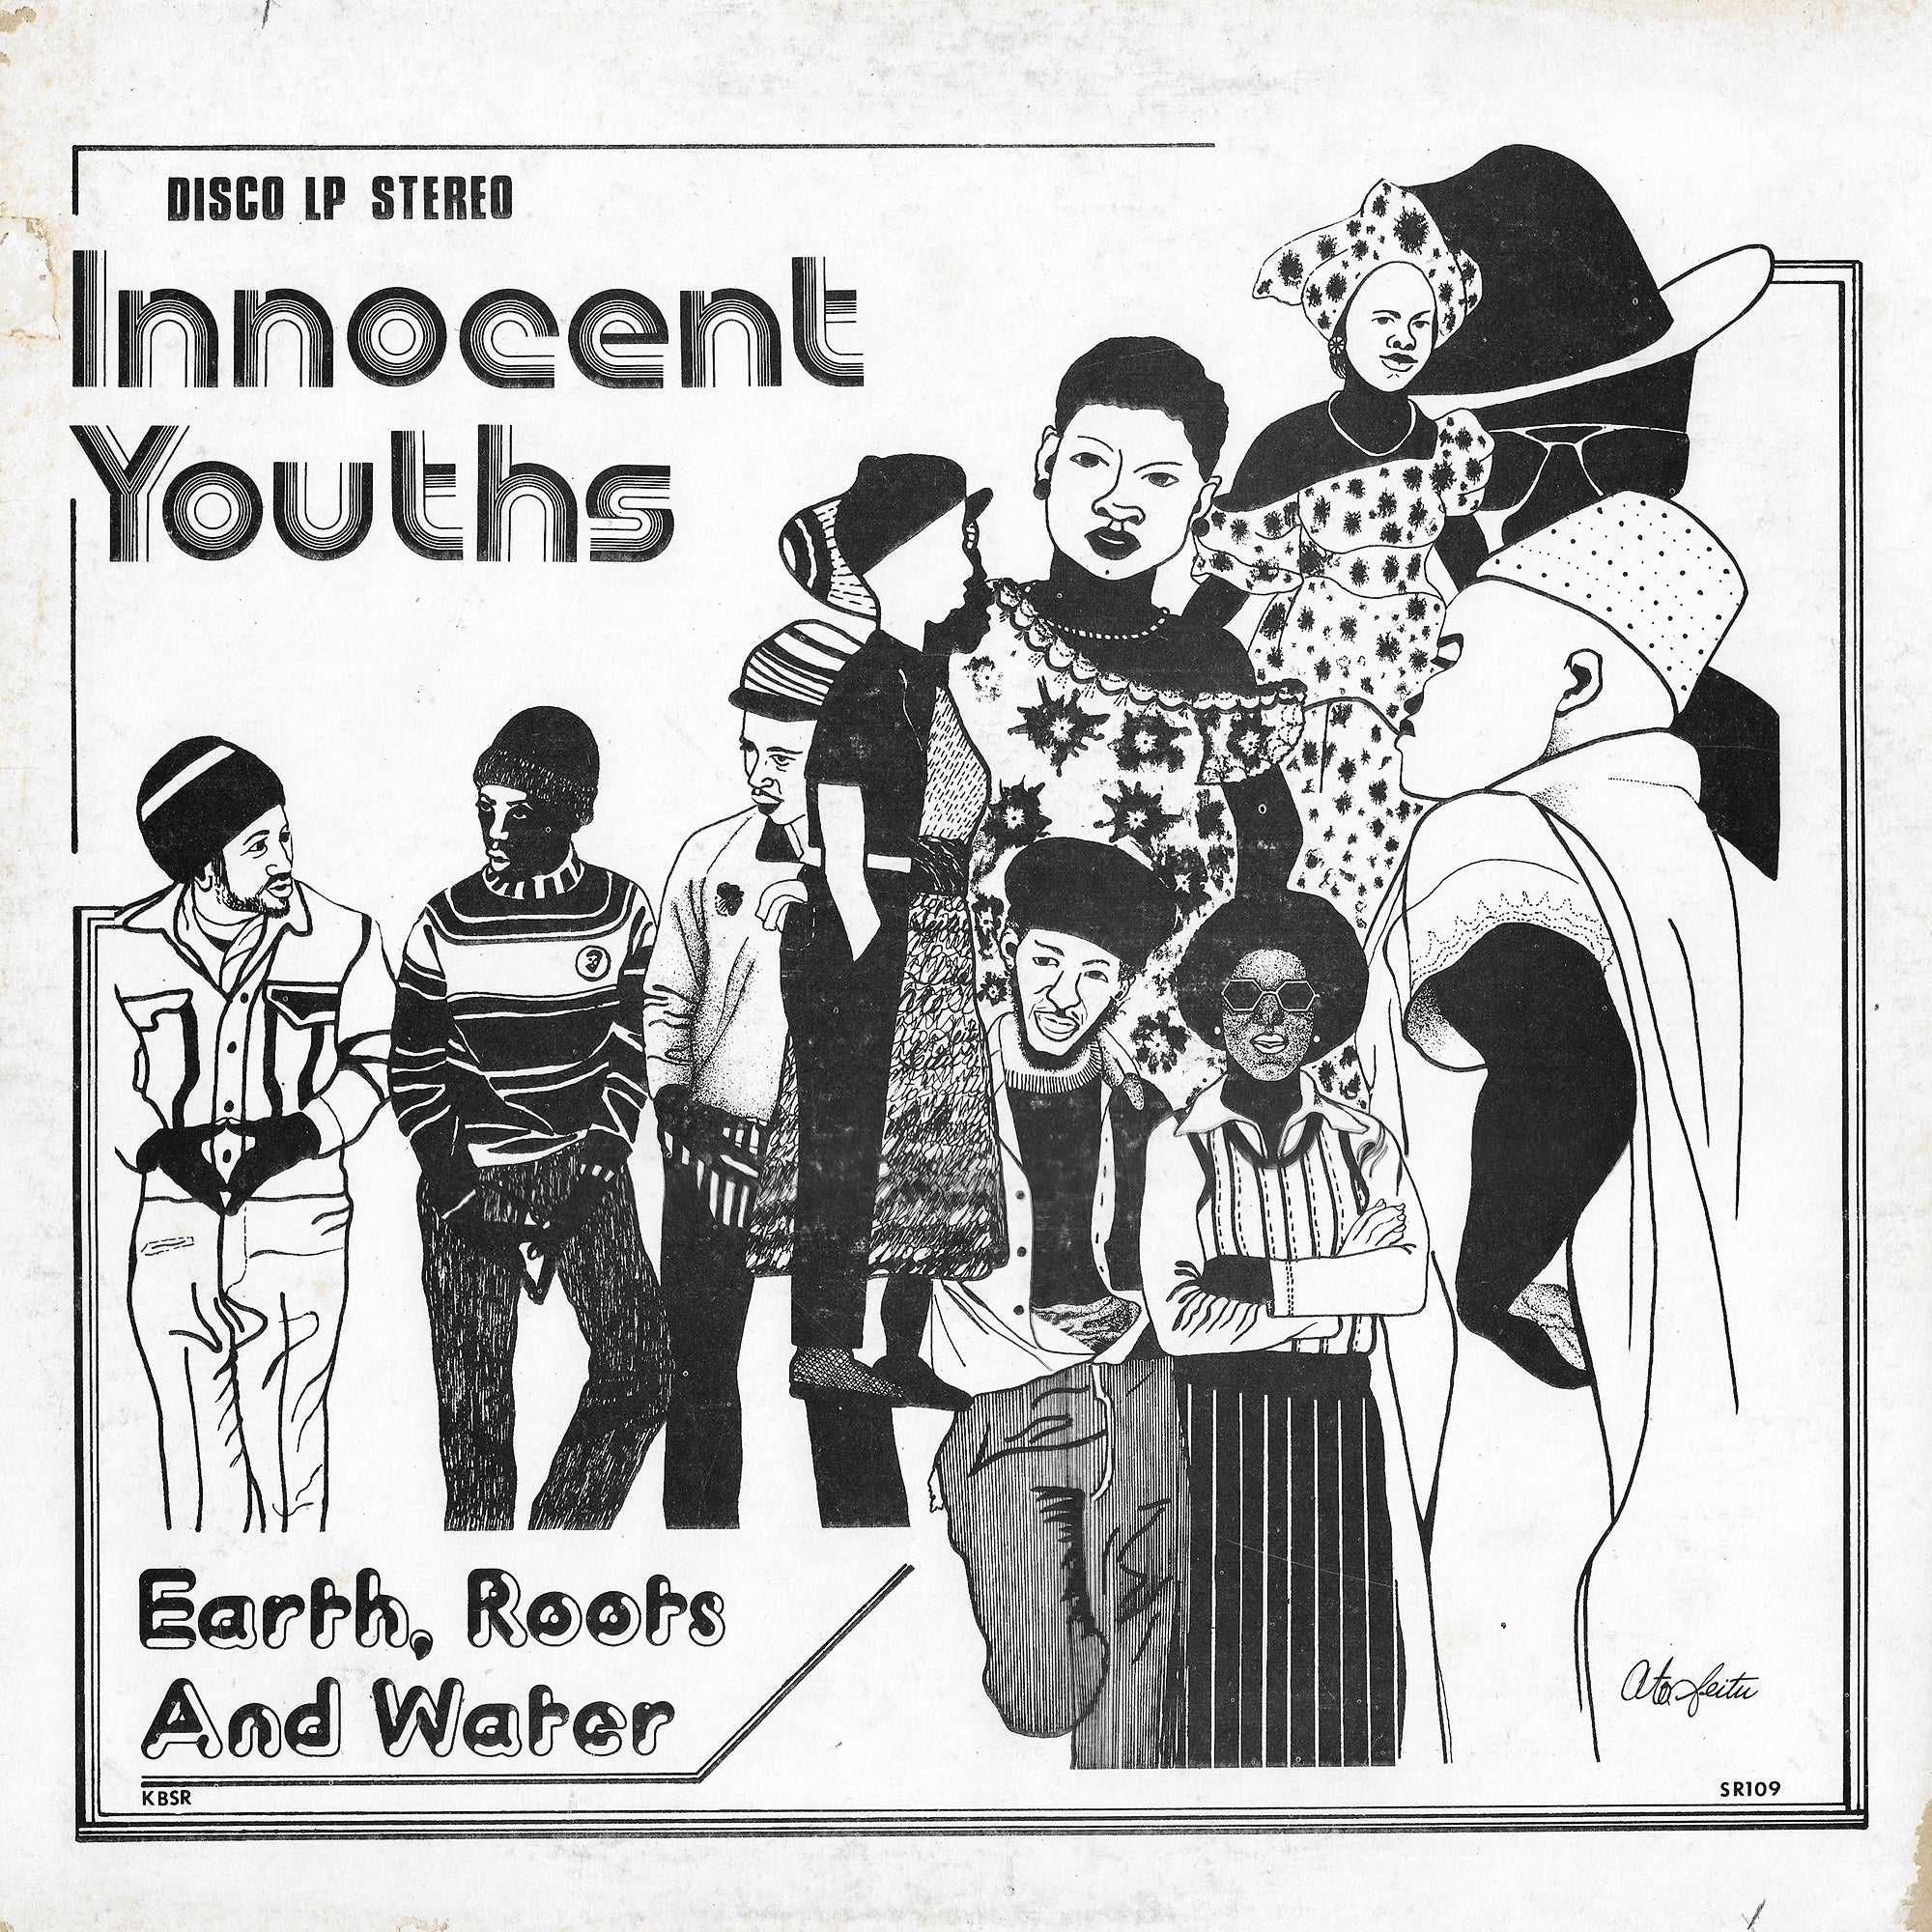 Earth, Roots And Water - Innocent Youths